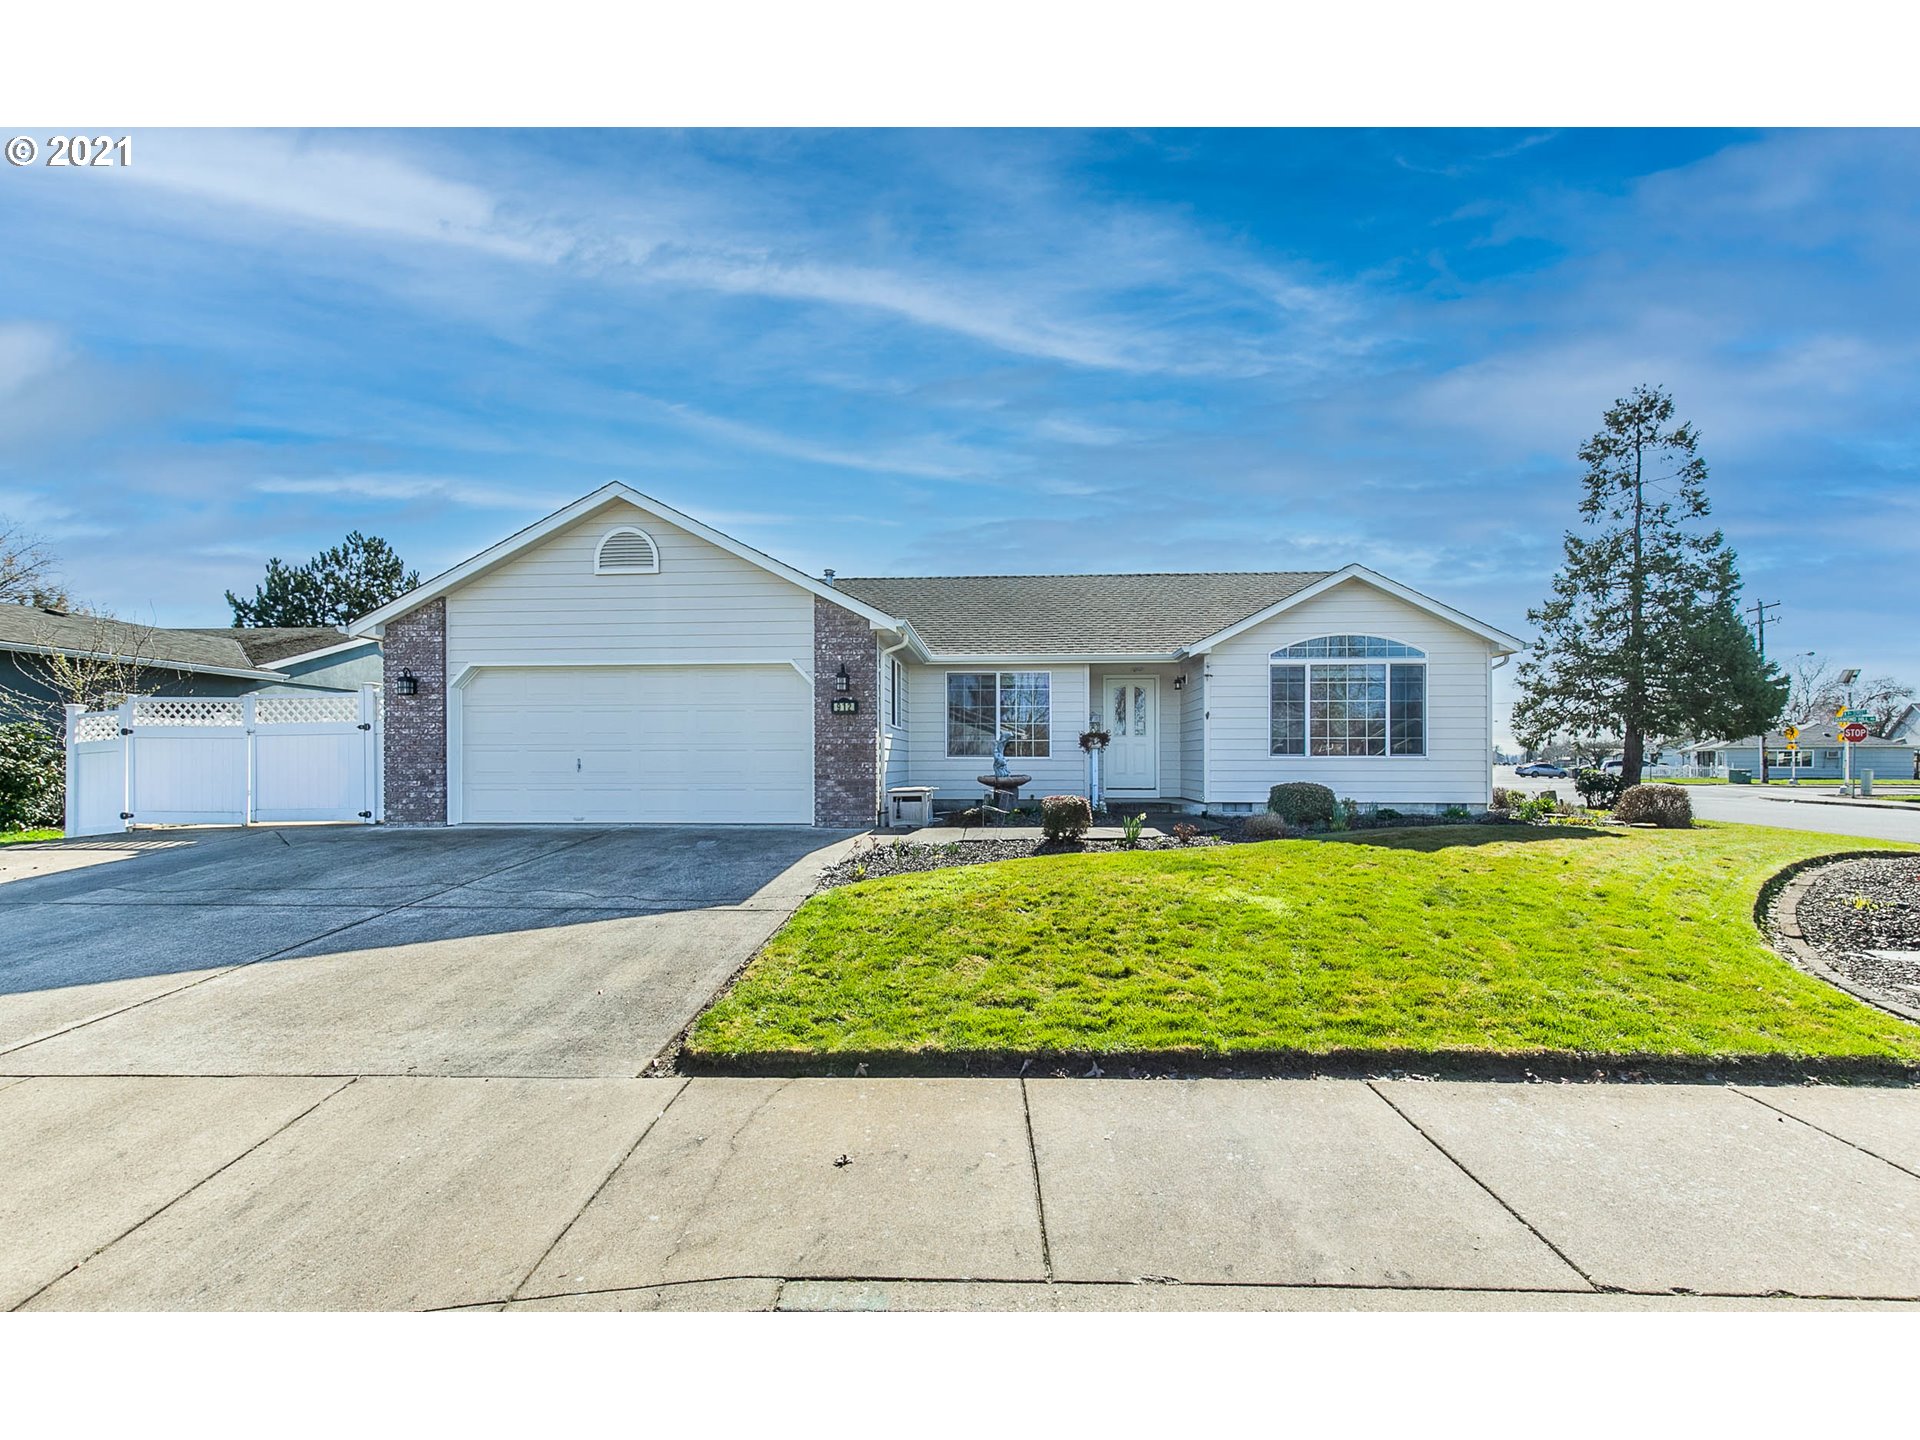 912 RED CLOVER CT (1 of 28)